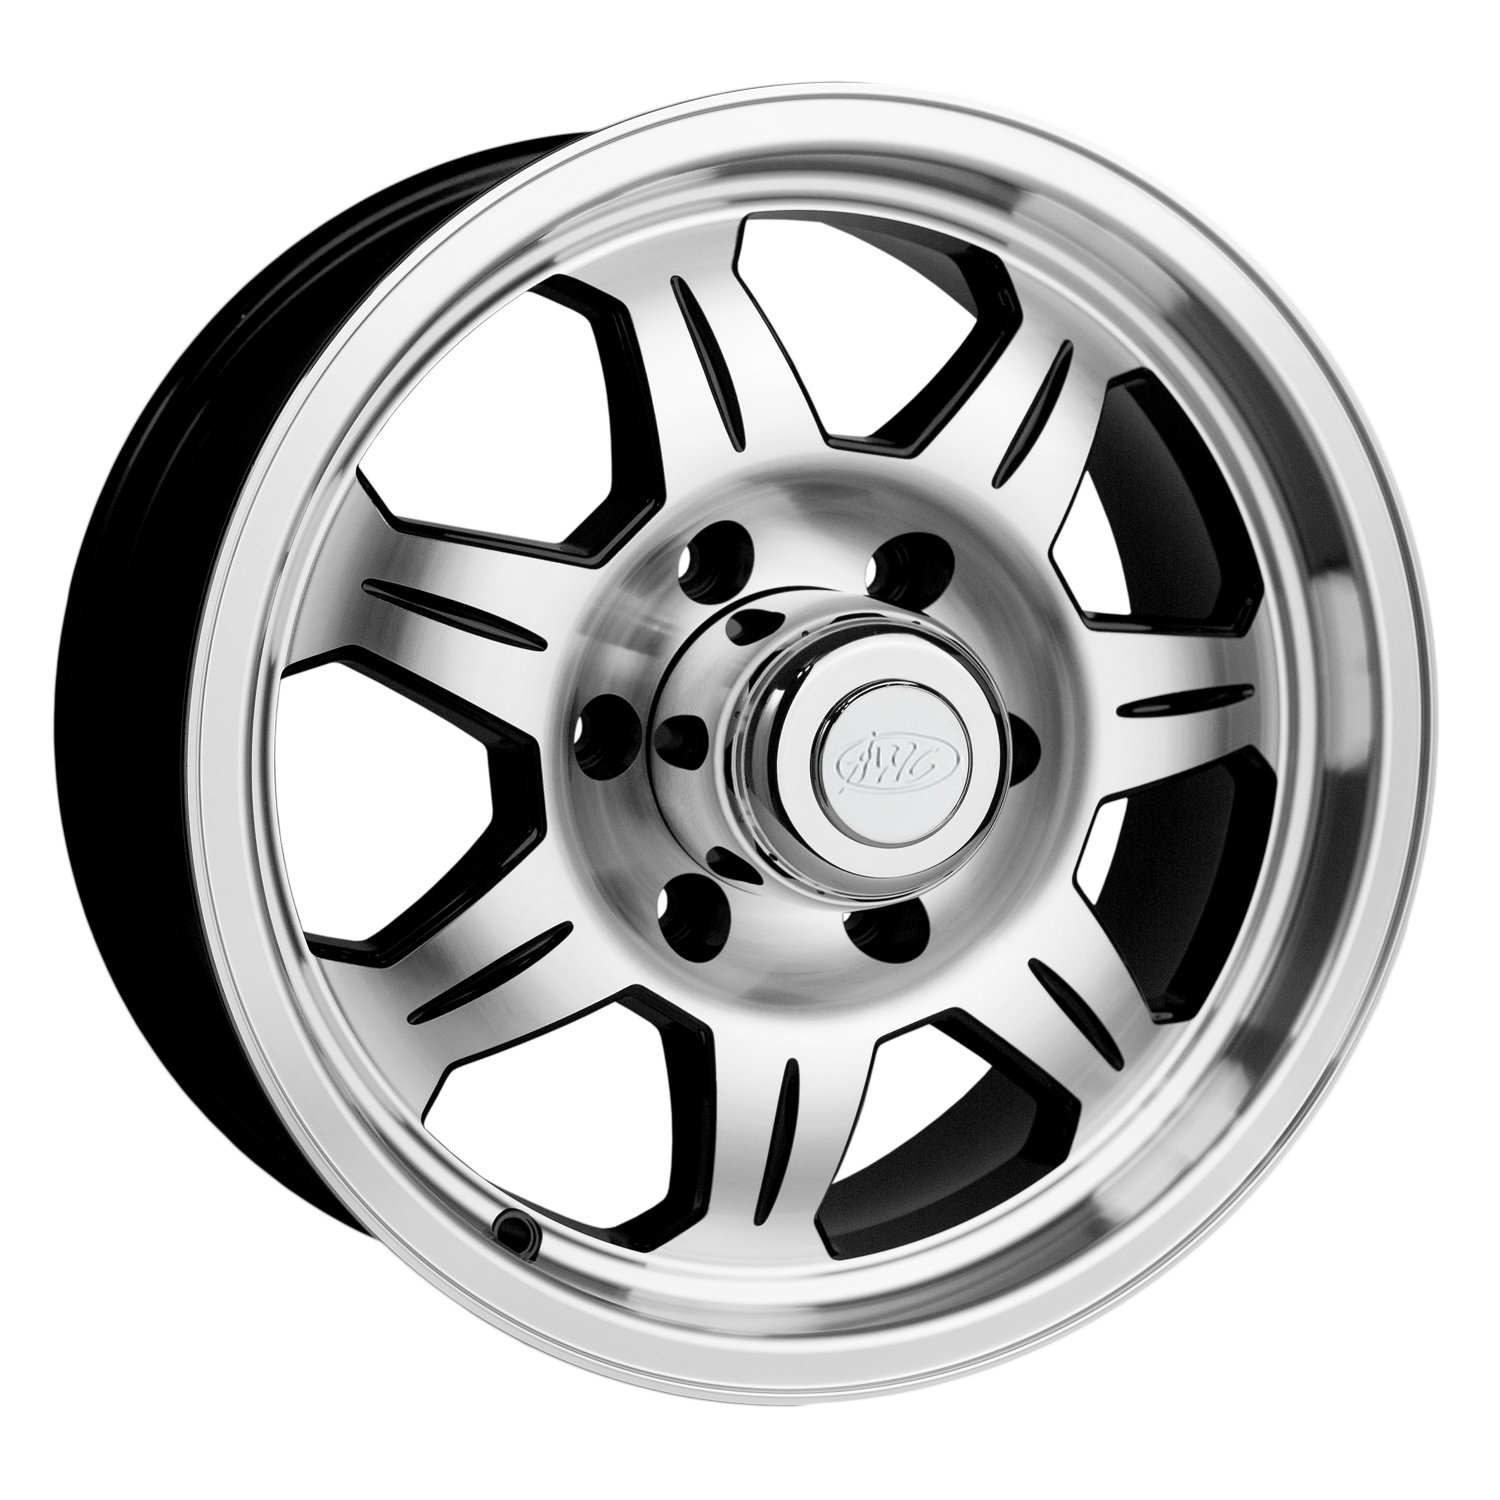 870 ELEMENT Trailer Wheel Size: 15 X 5" Bolt Pattern: 5 x 4.50" (114.30 mm) [Machined with Black Accents]